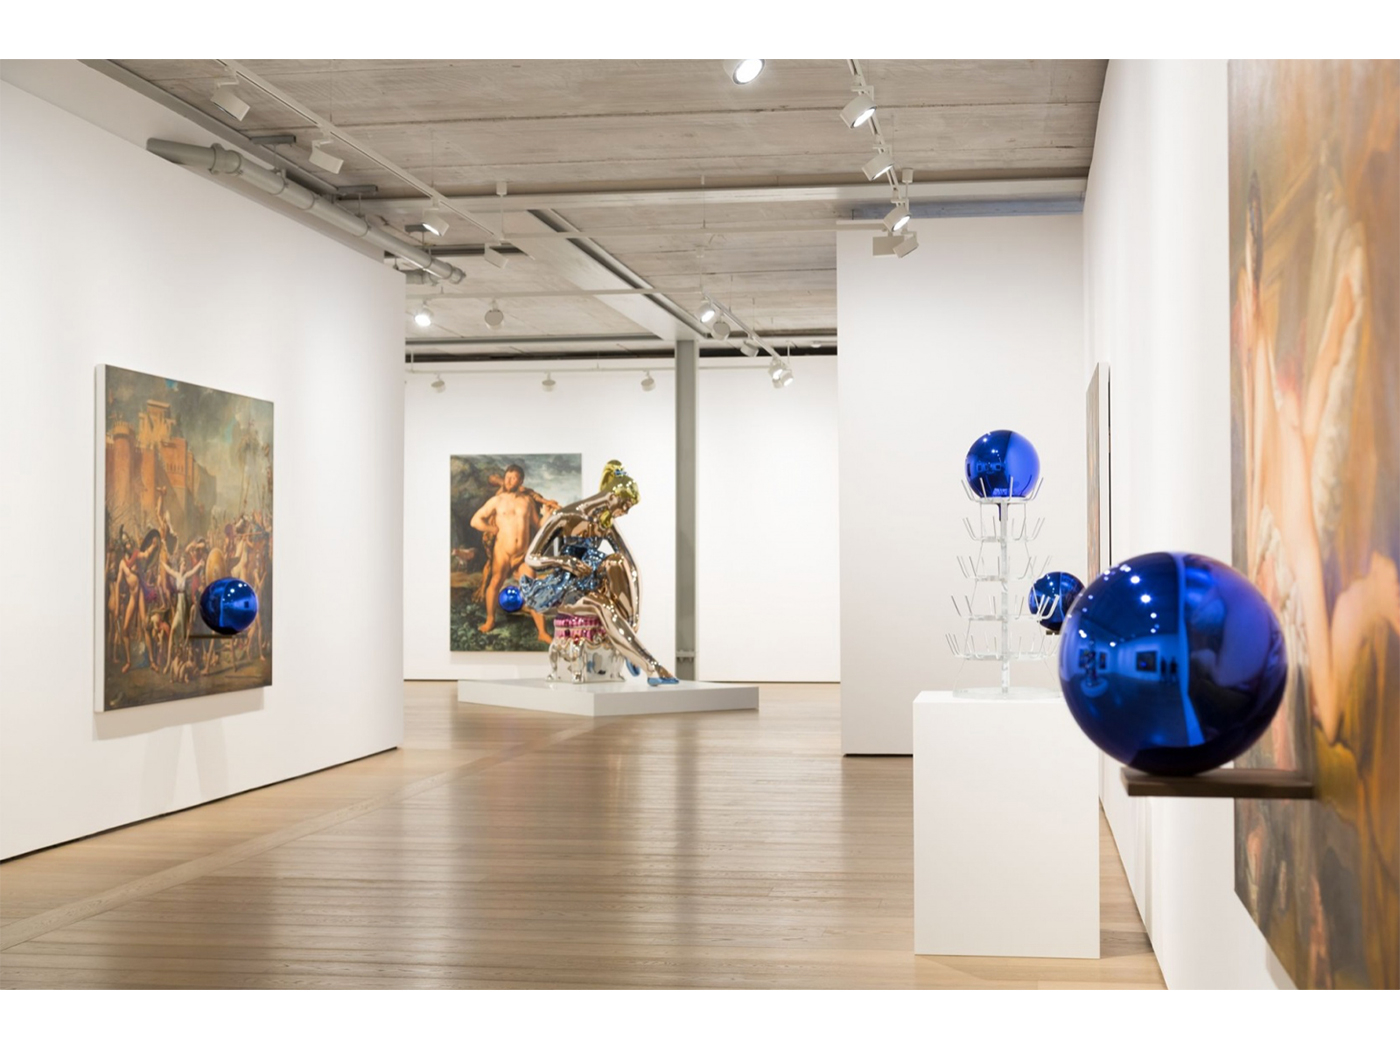 Jeff Koons' 'Carracci Flower' (2021) re-transcribes Agostino Carracci's 16th Century print into a shiny and kitsch vision.